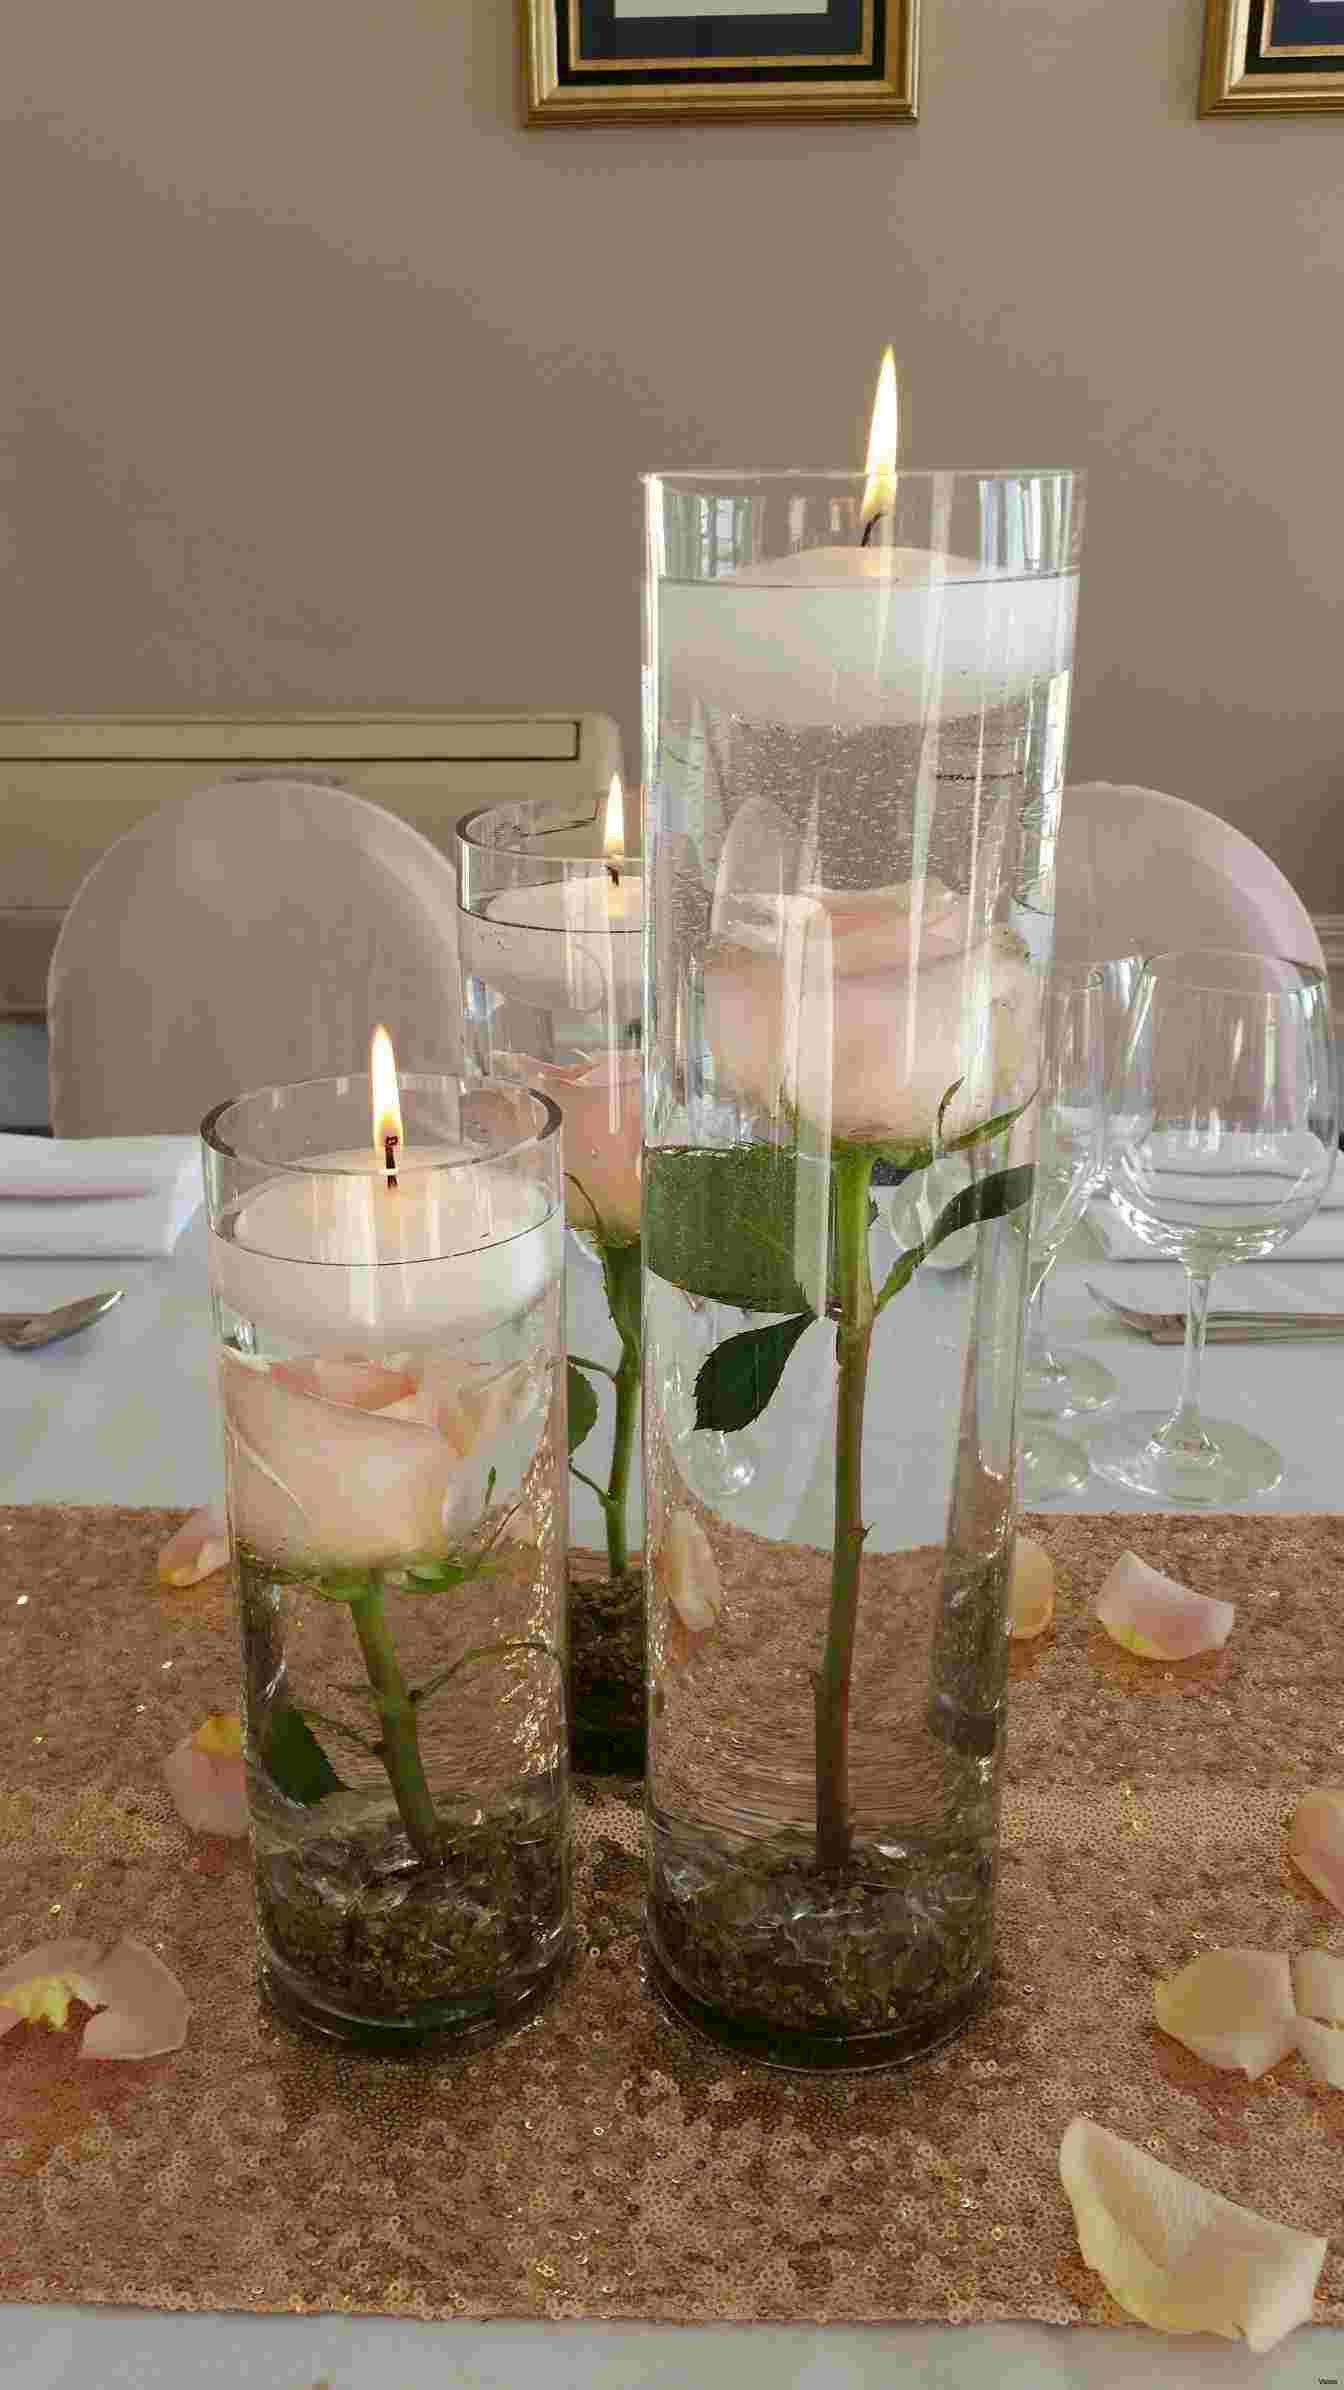 10 Trendy Tall Acrylic Cylinder Vase 2024 free download tall acrylic cylinder vase of glass cylinder vase centerpiece ideas images tall vase centerpiece regarding glass cylinder vase centerpiece ideas stock floating candles decoration fresh until